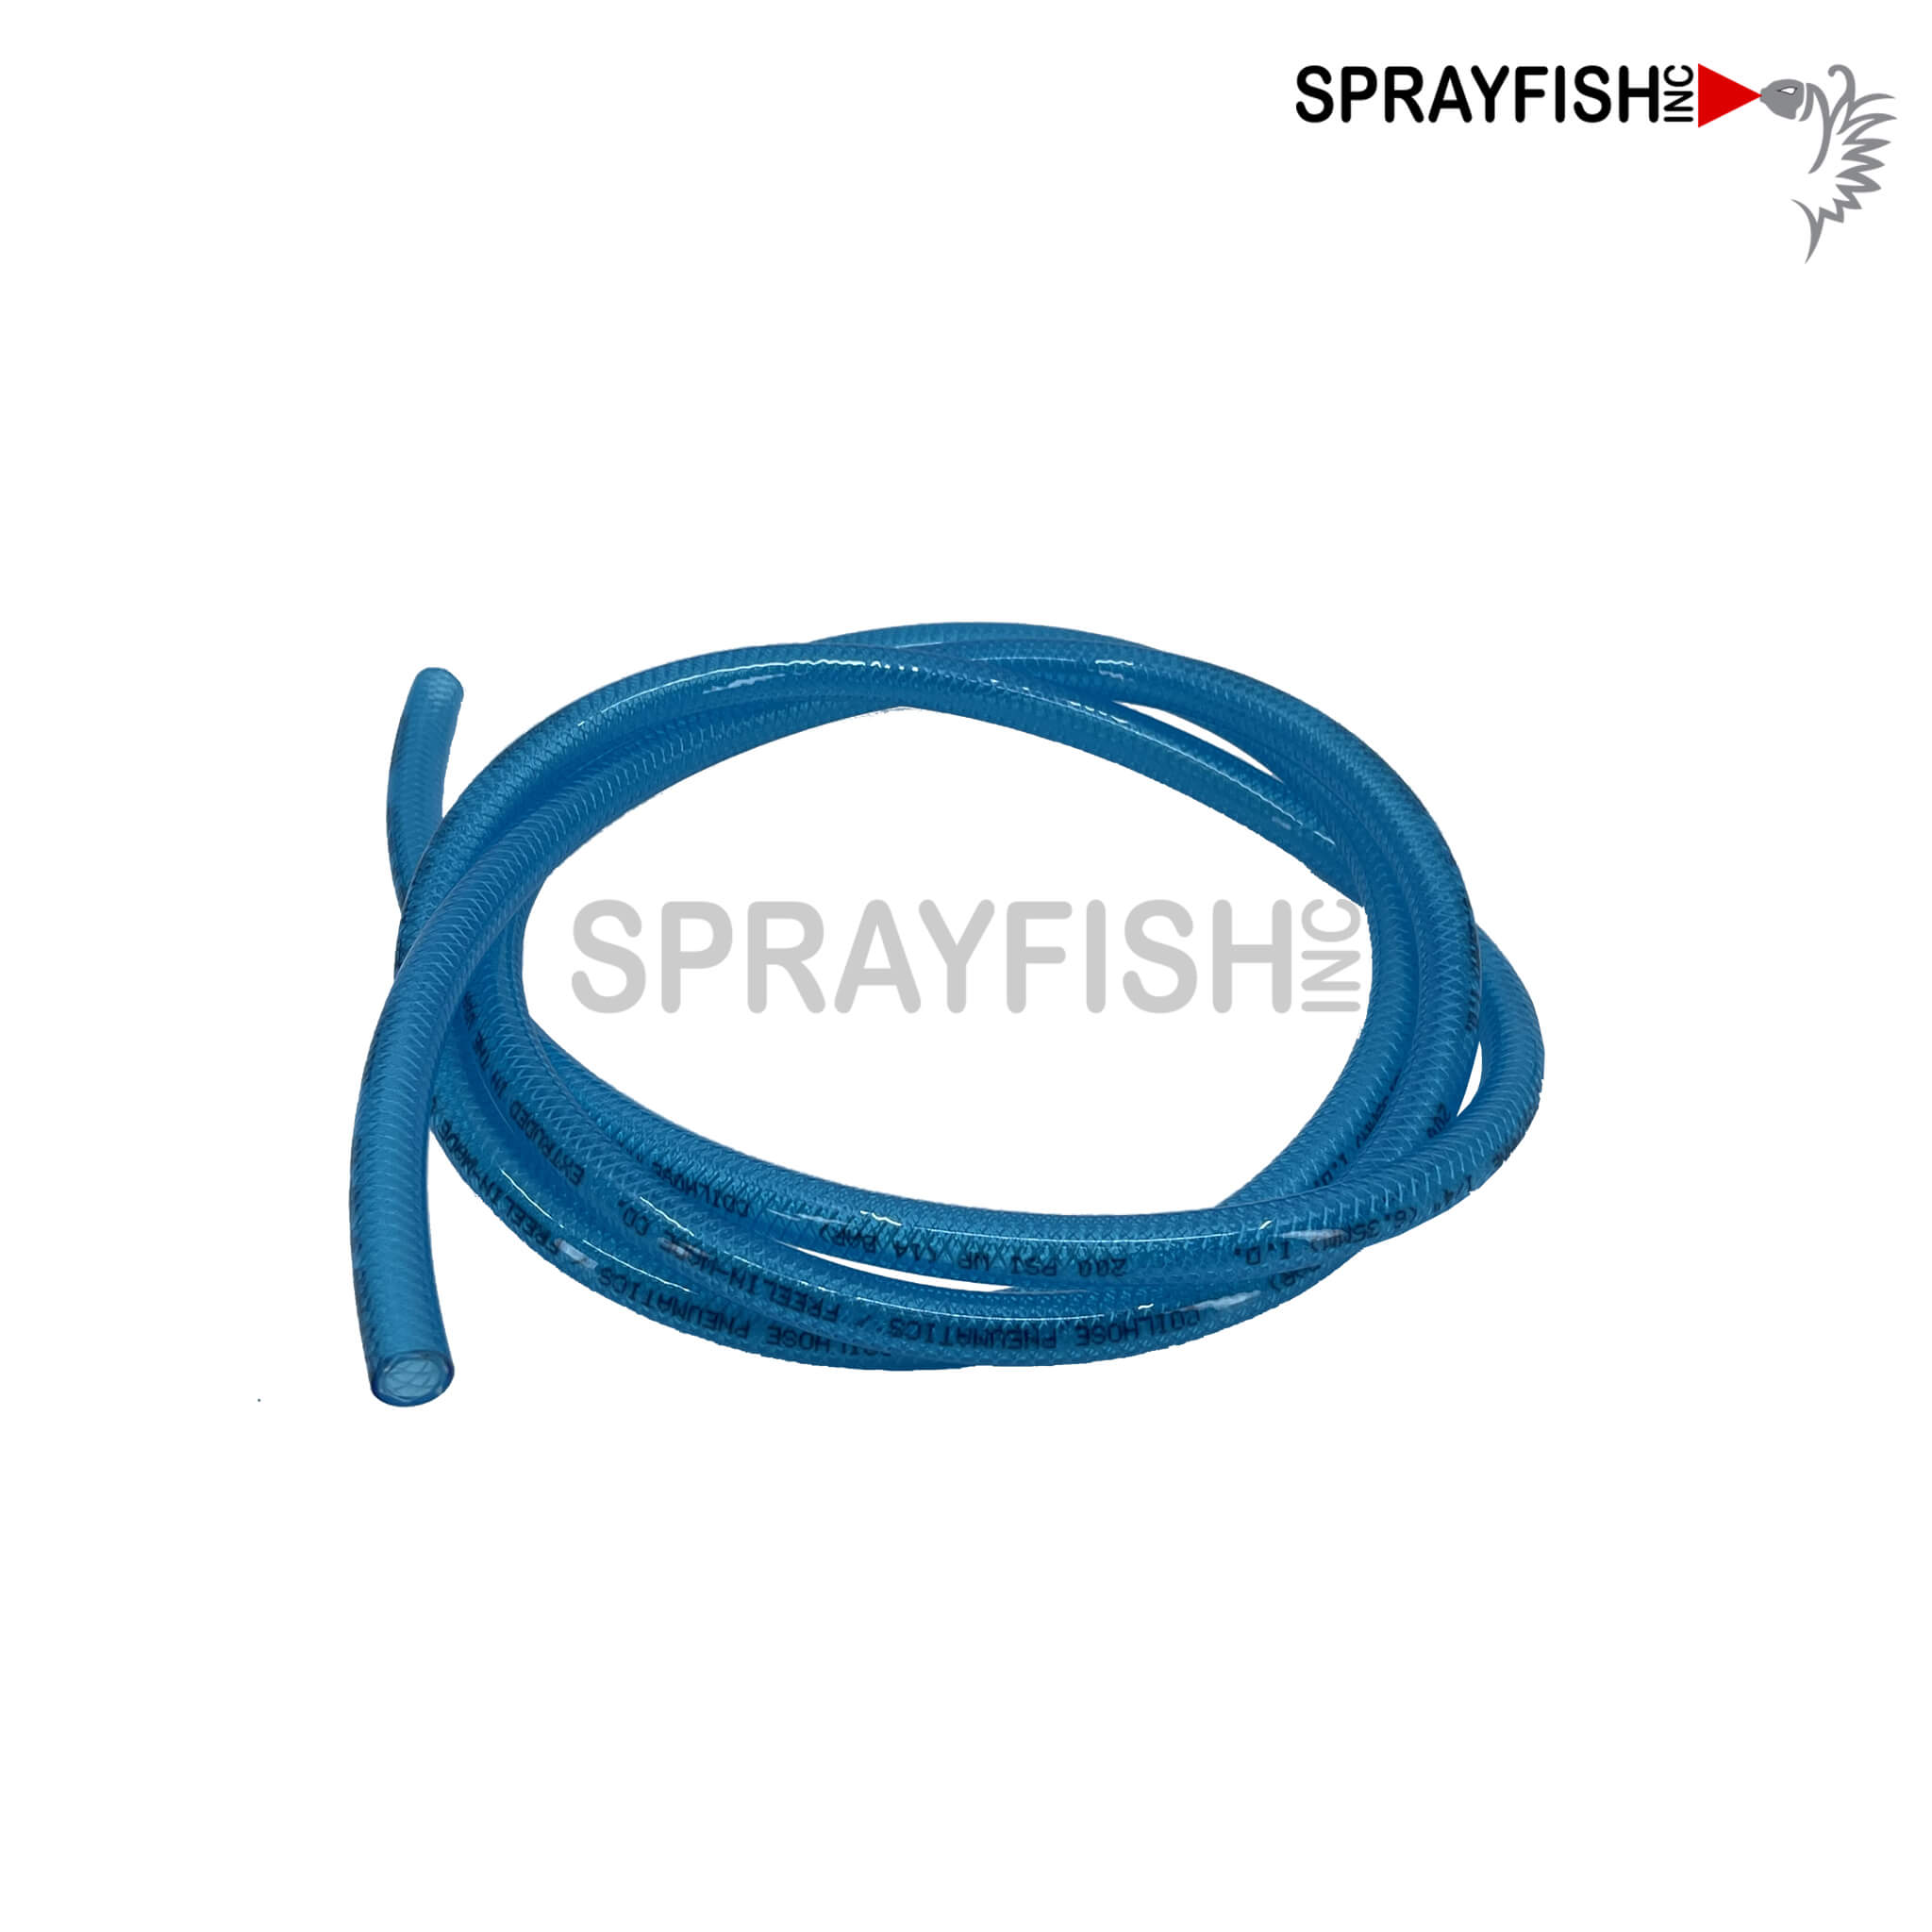 BLUE 1/4" FLEXIBLE AIR HOSE WITH FITTINGS